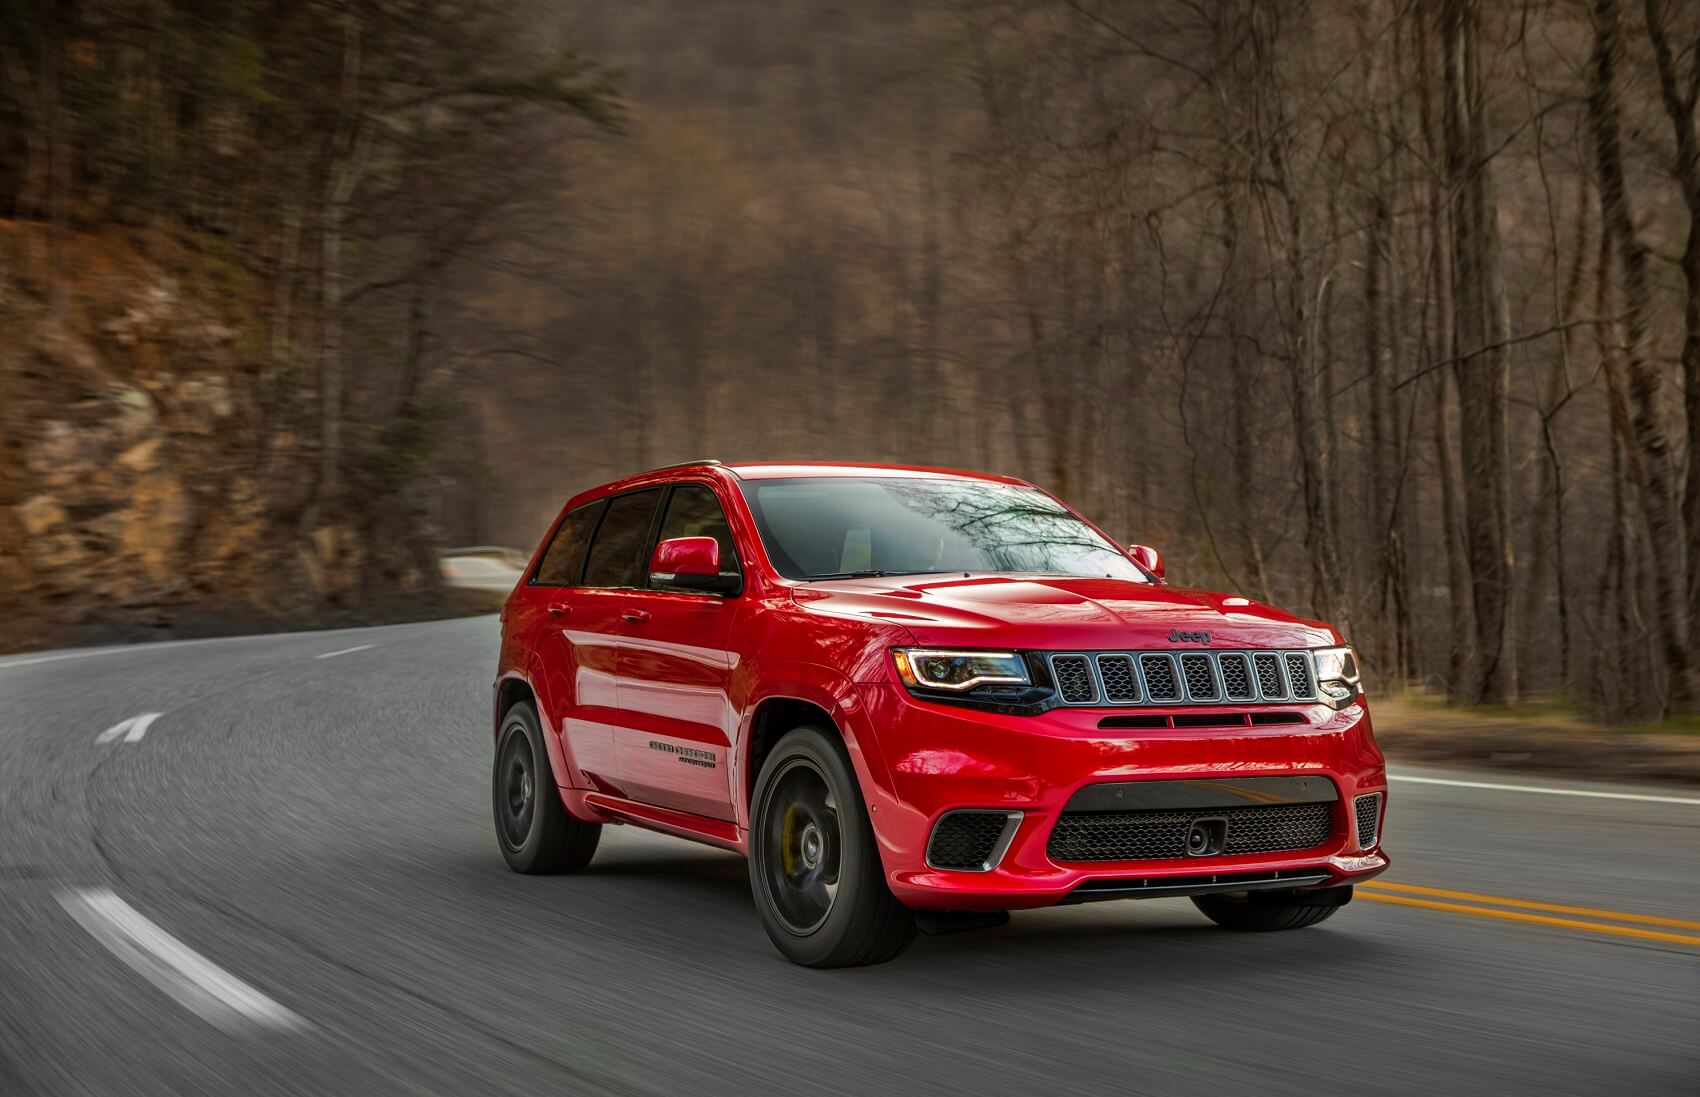 Jeep Grand Cherokee in Red on Road